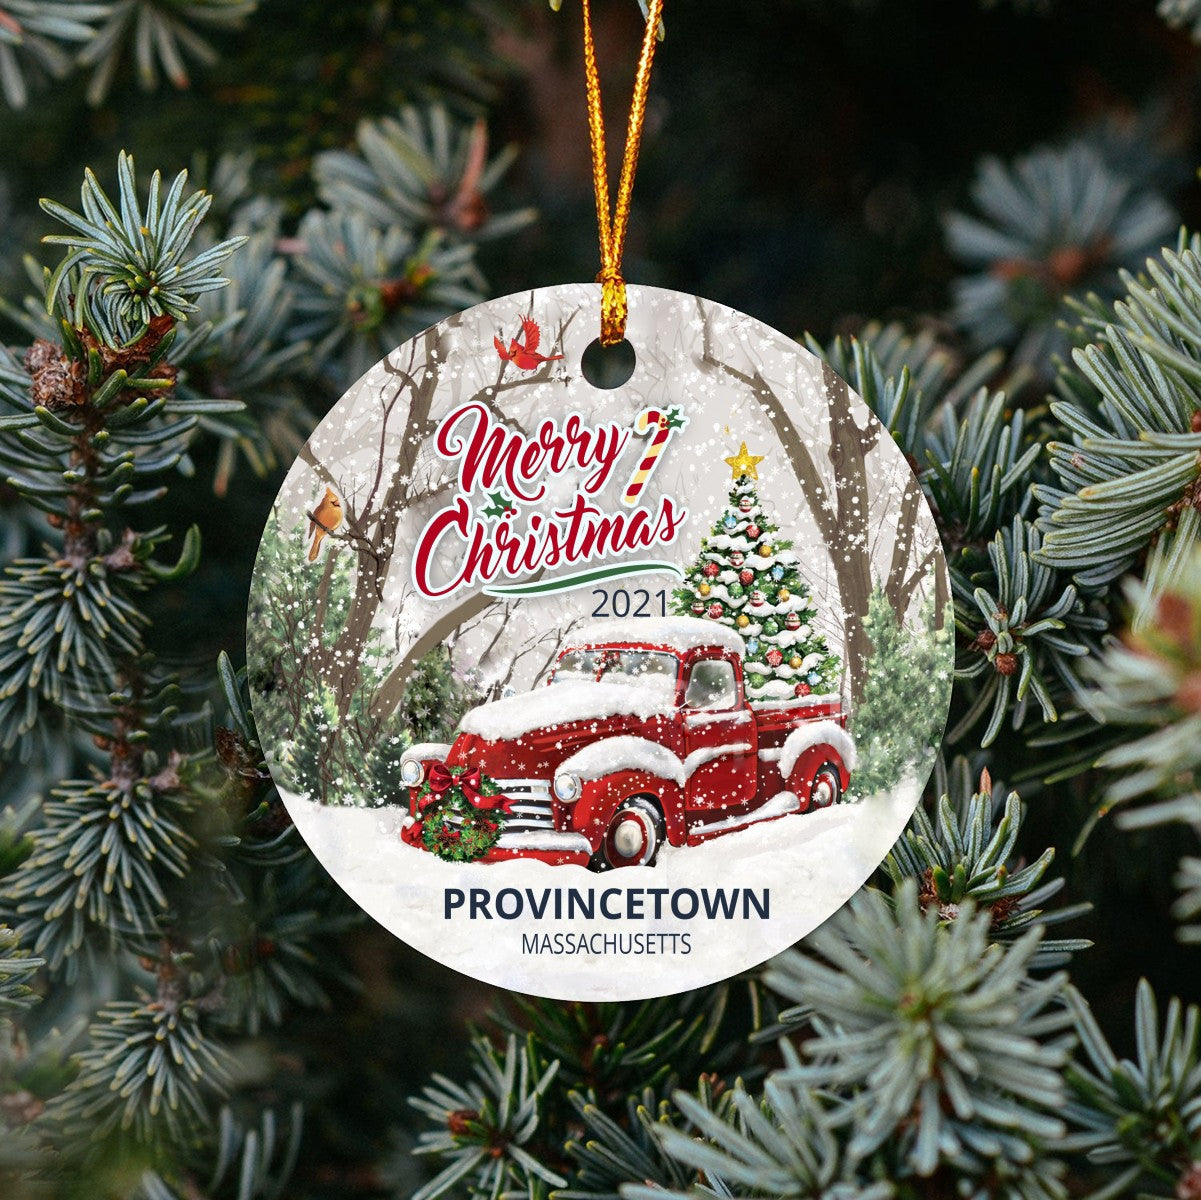 Christmas Tree Ornaments Provincetown - Ornament With Name City, State Provincetown Massachusetts MA Ornament - Red Truck Xmas Ornaments 3'' Plastic Gift For Family, Friend And Housewarming